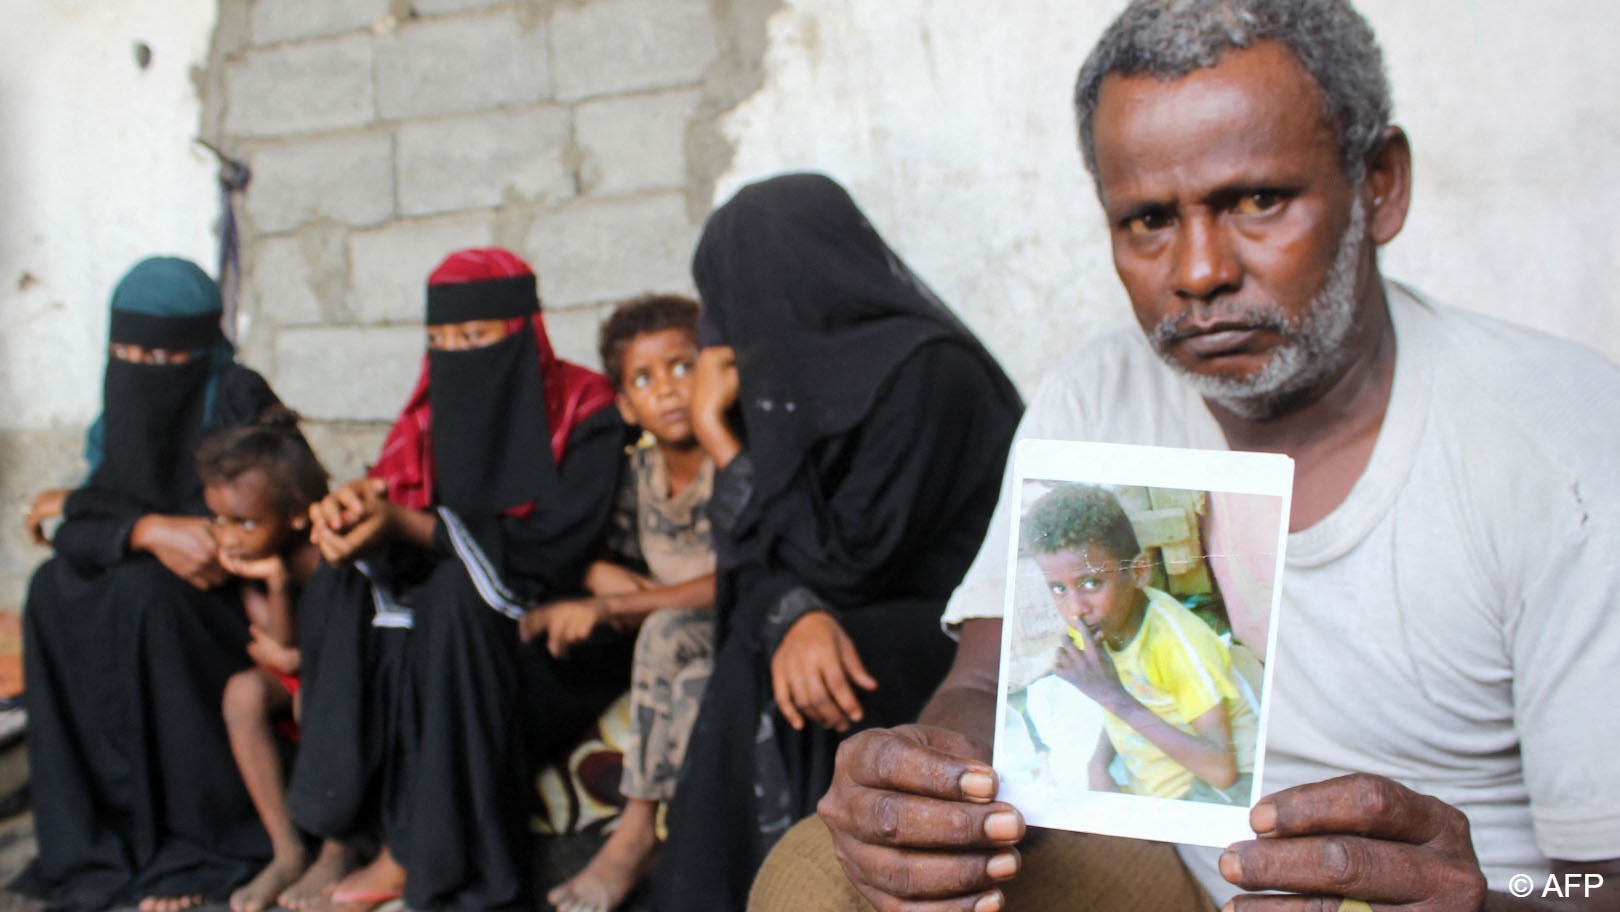  Ahmed al-Marouai's son Mourad was torn to pieces by a landmine on a beach in Yemen.